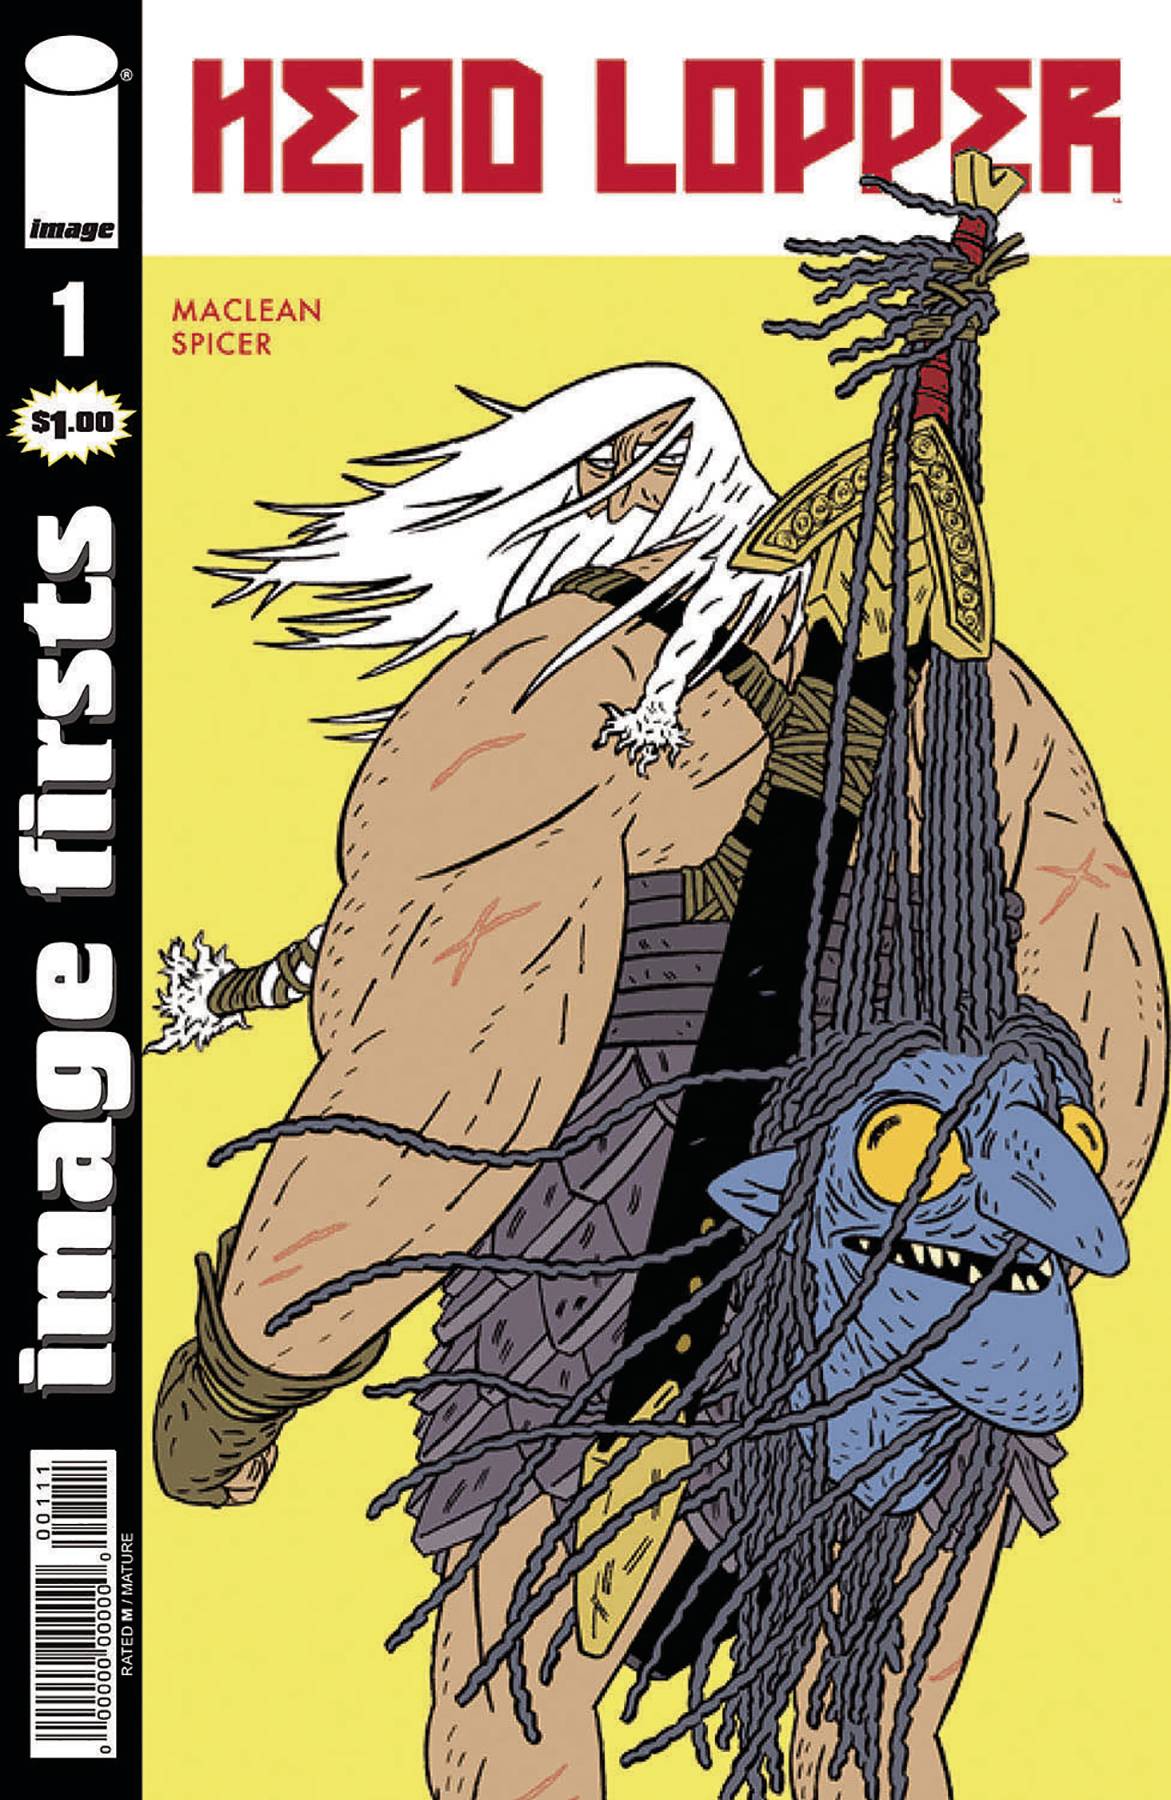 IMAGE FIRSTS HEAD LOPPER #1